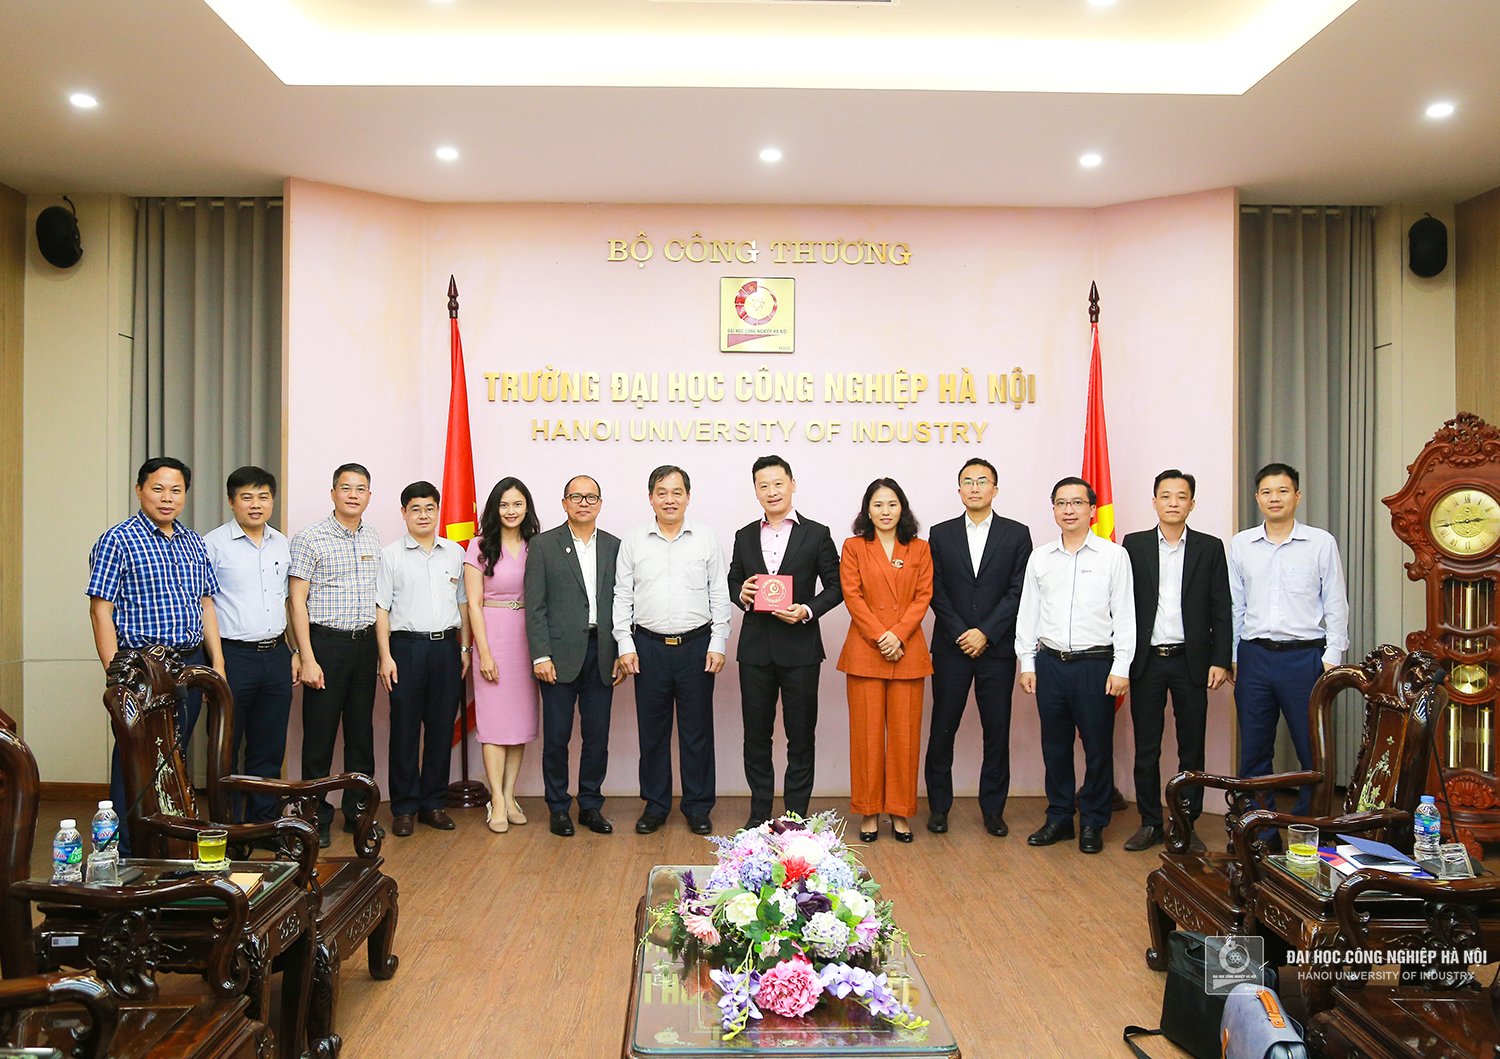 Siemens Digital Industries Software Company, Vietbay and ESTEC paid a working visit to Hanoi University of Industry